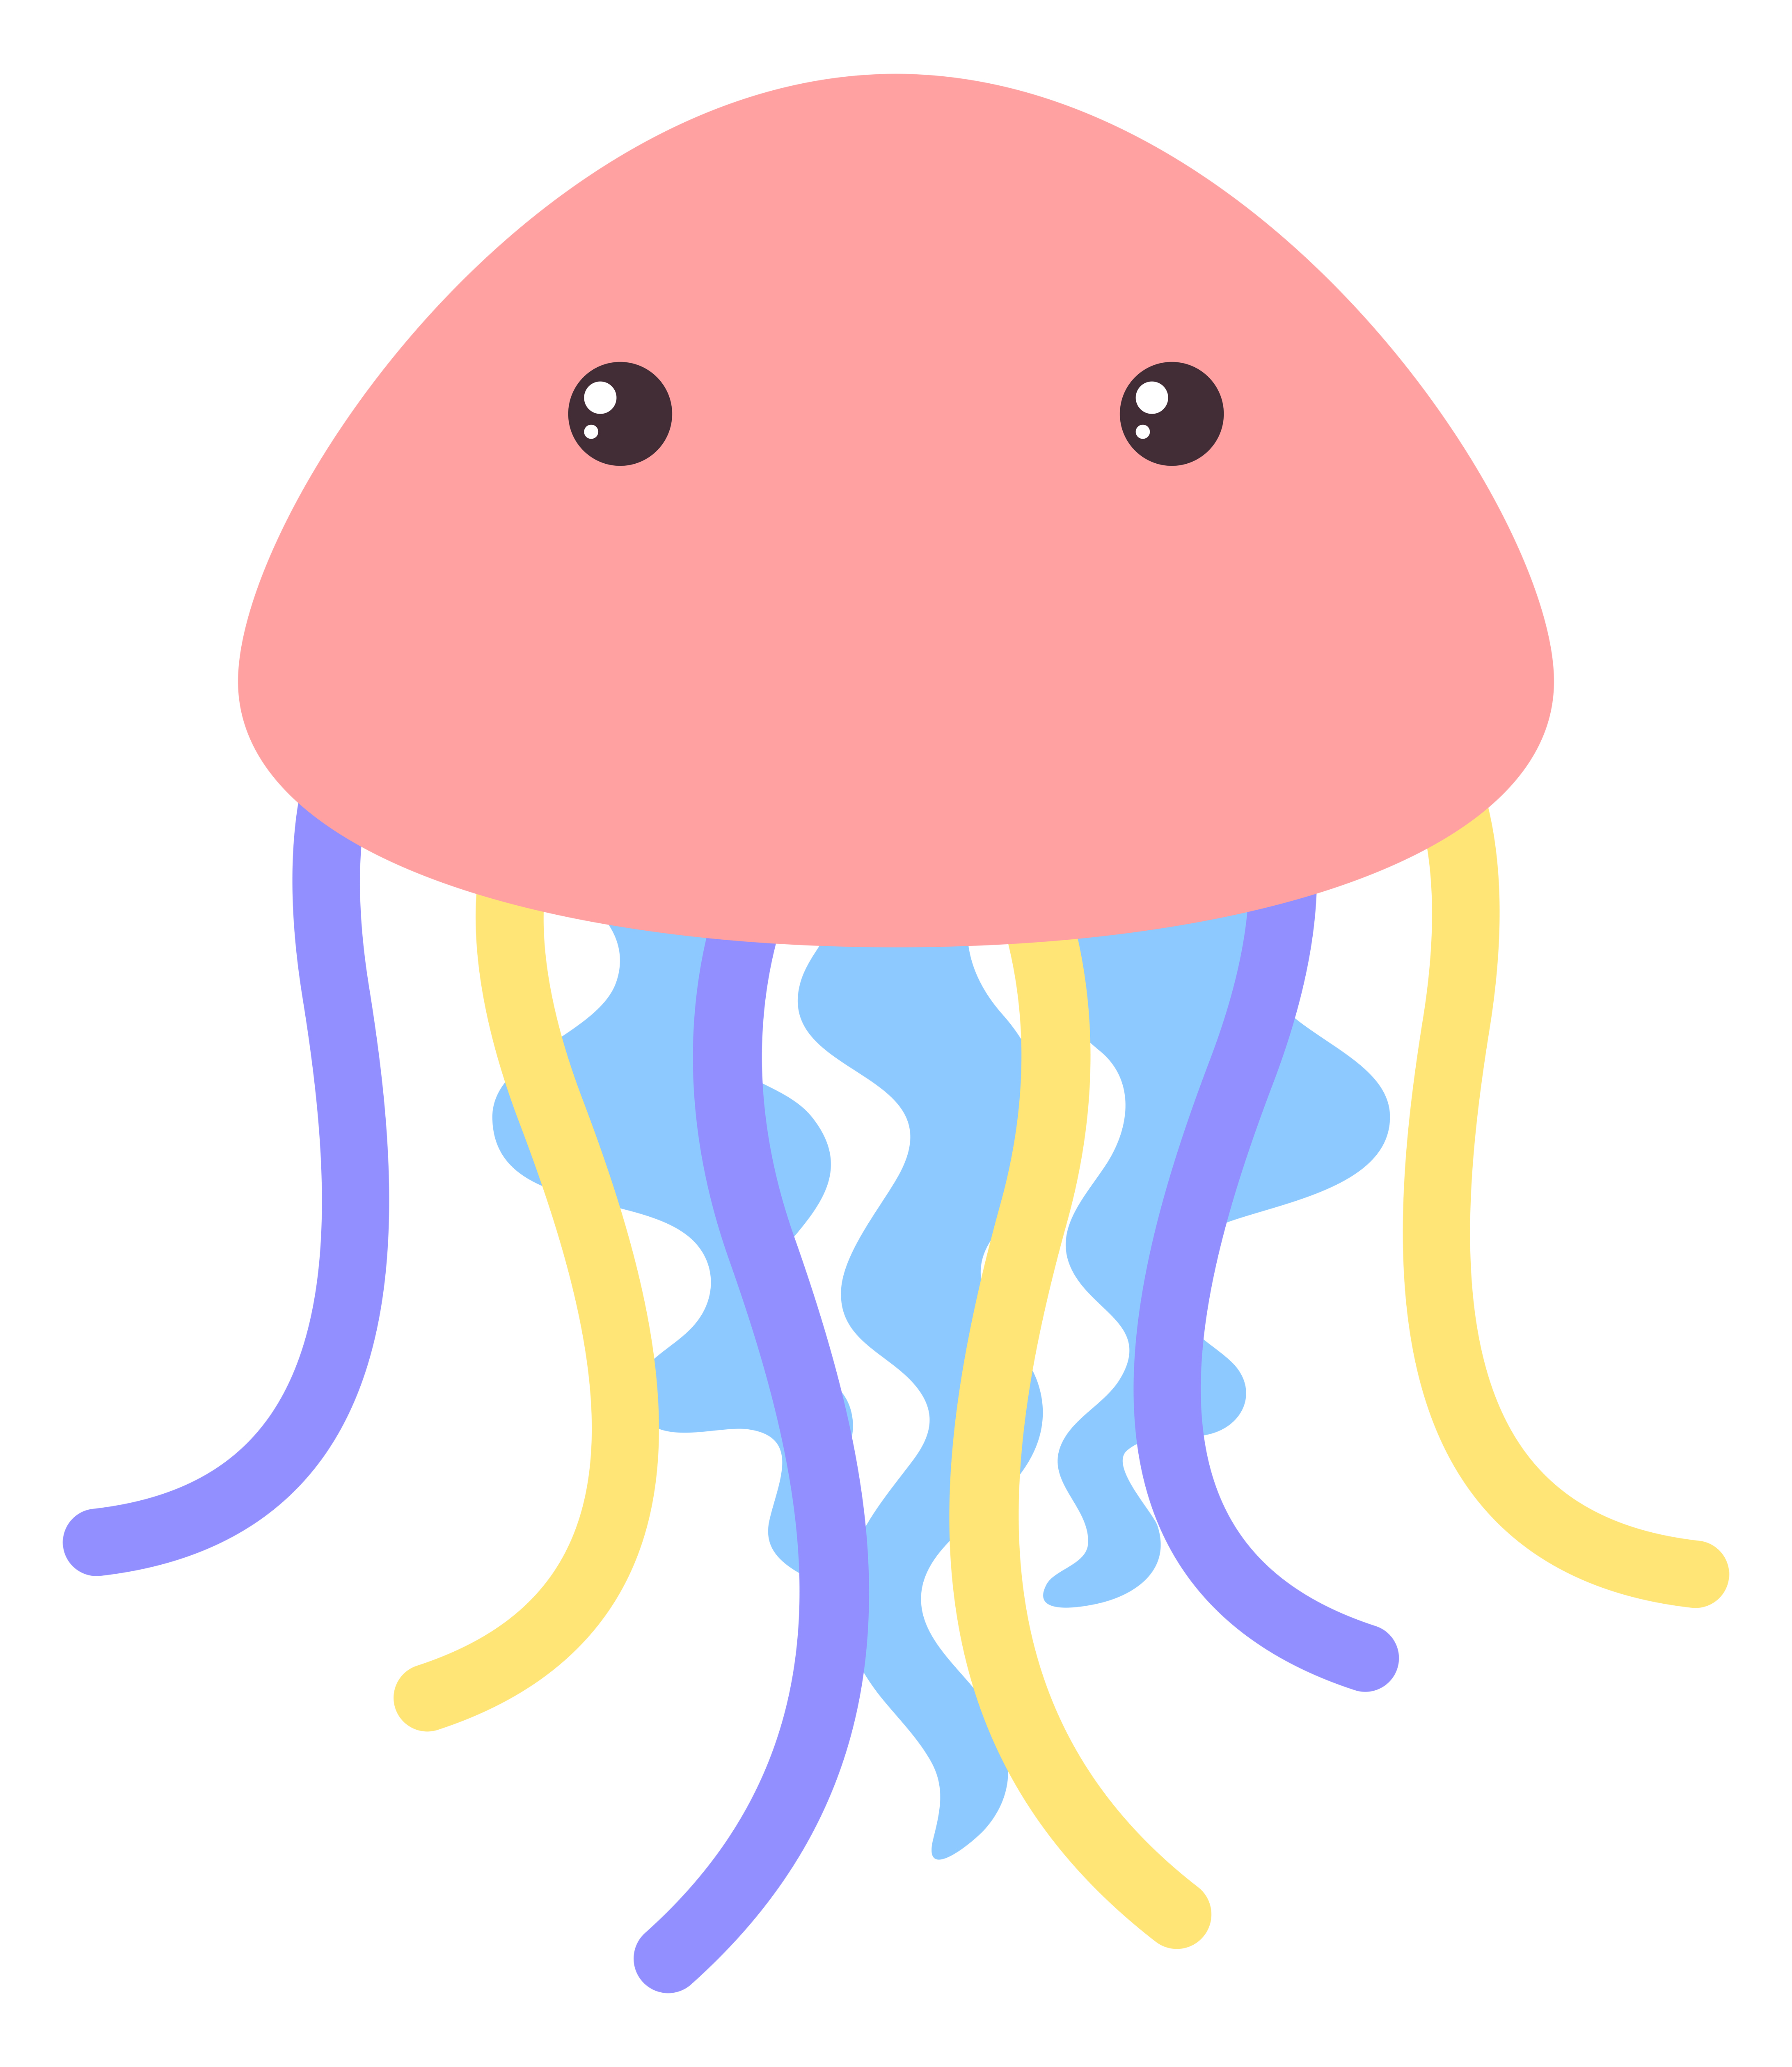 Download Cute jellyfish on white background - Download Free Vectors, Clipart Graphics & Vector Art